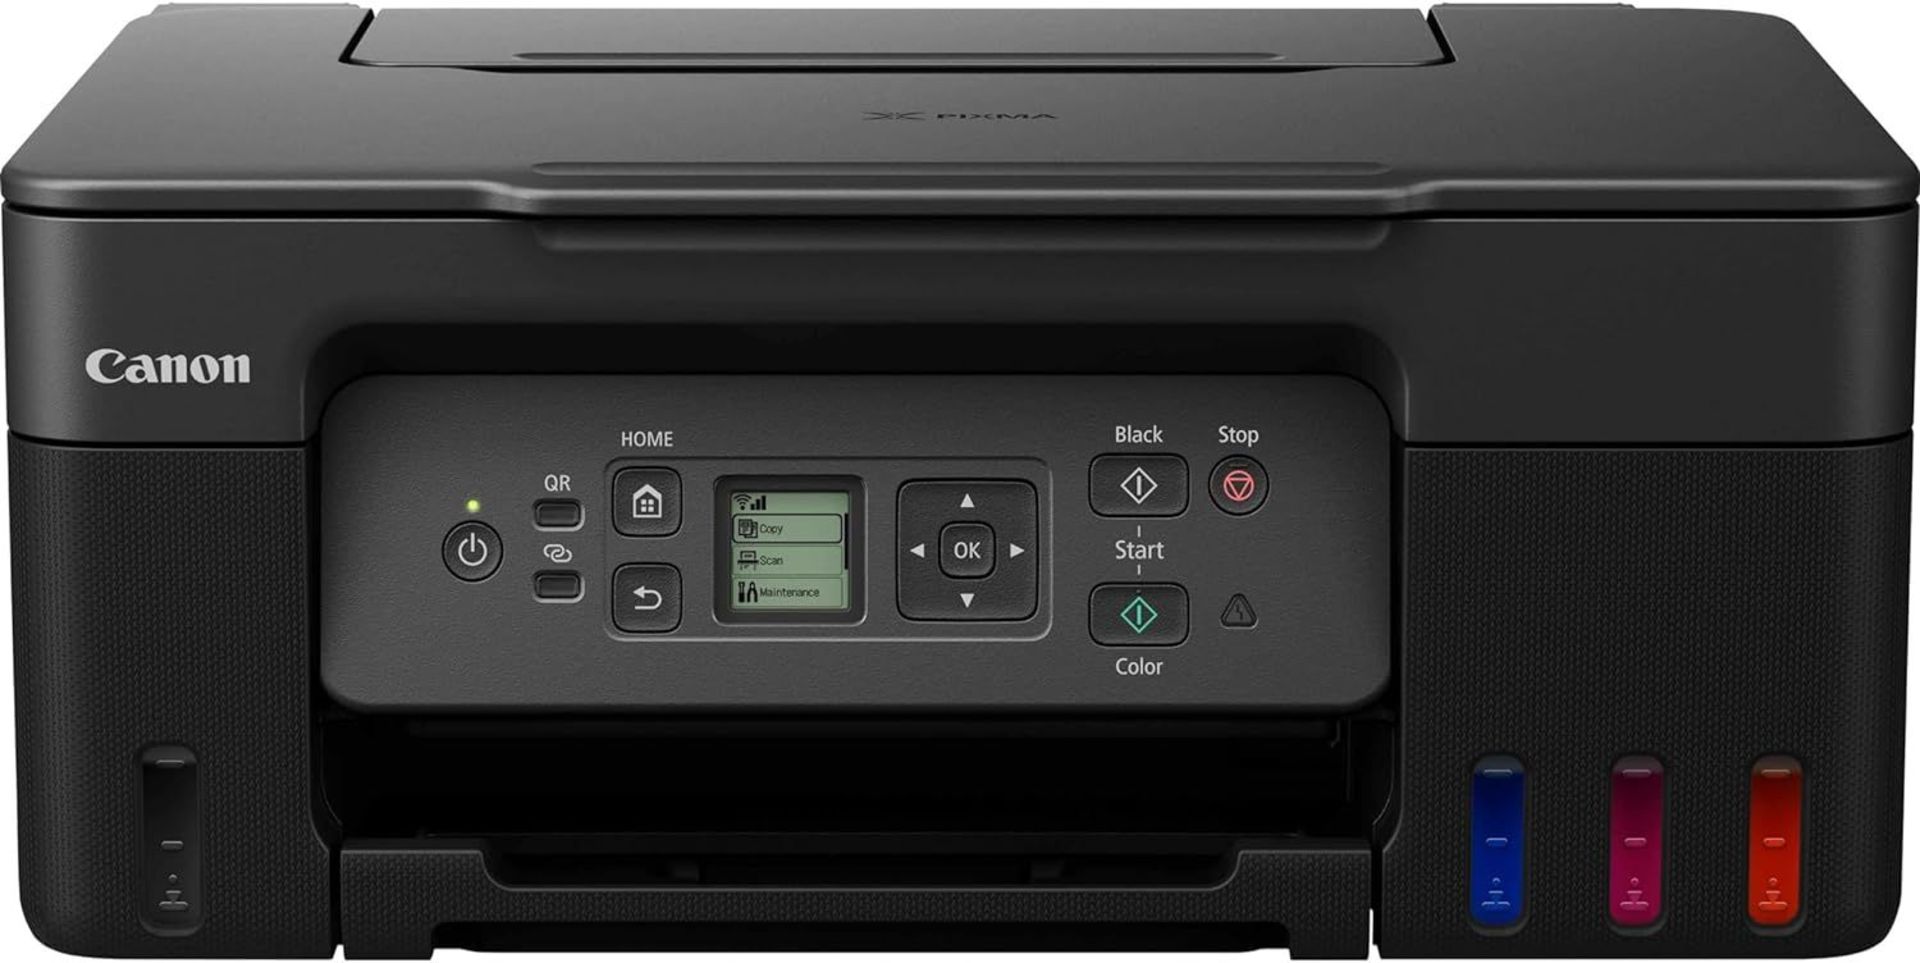 Canon PIXMA G3570 - A fast, cost-efficient 3-in-1 everyday printer . - P2. RRP £289.00. ULTRA-LOW